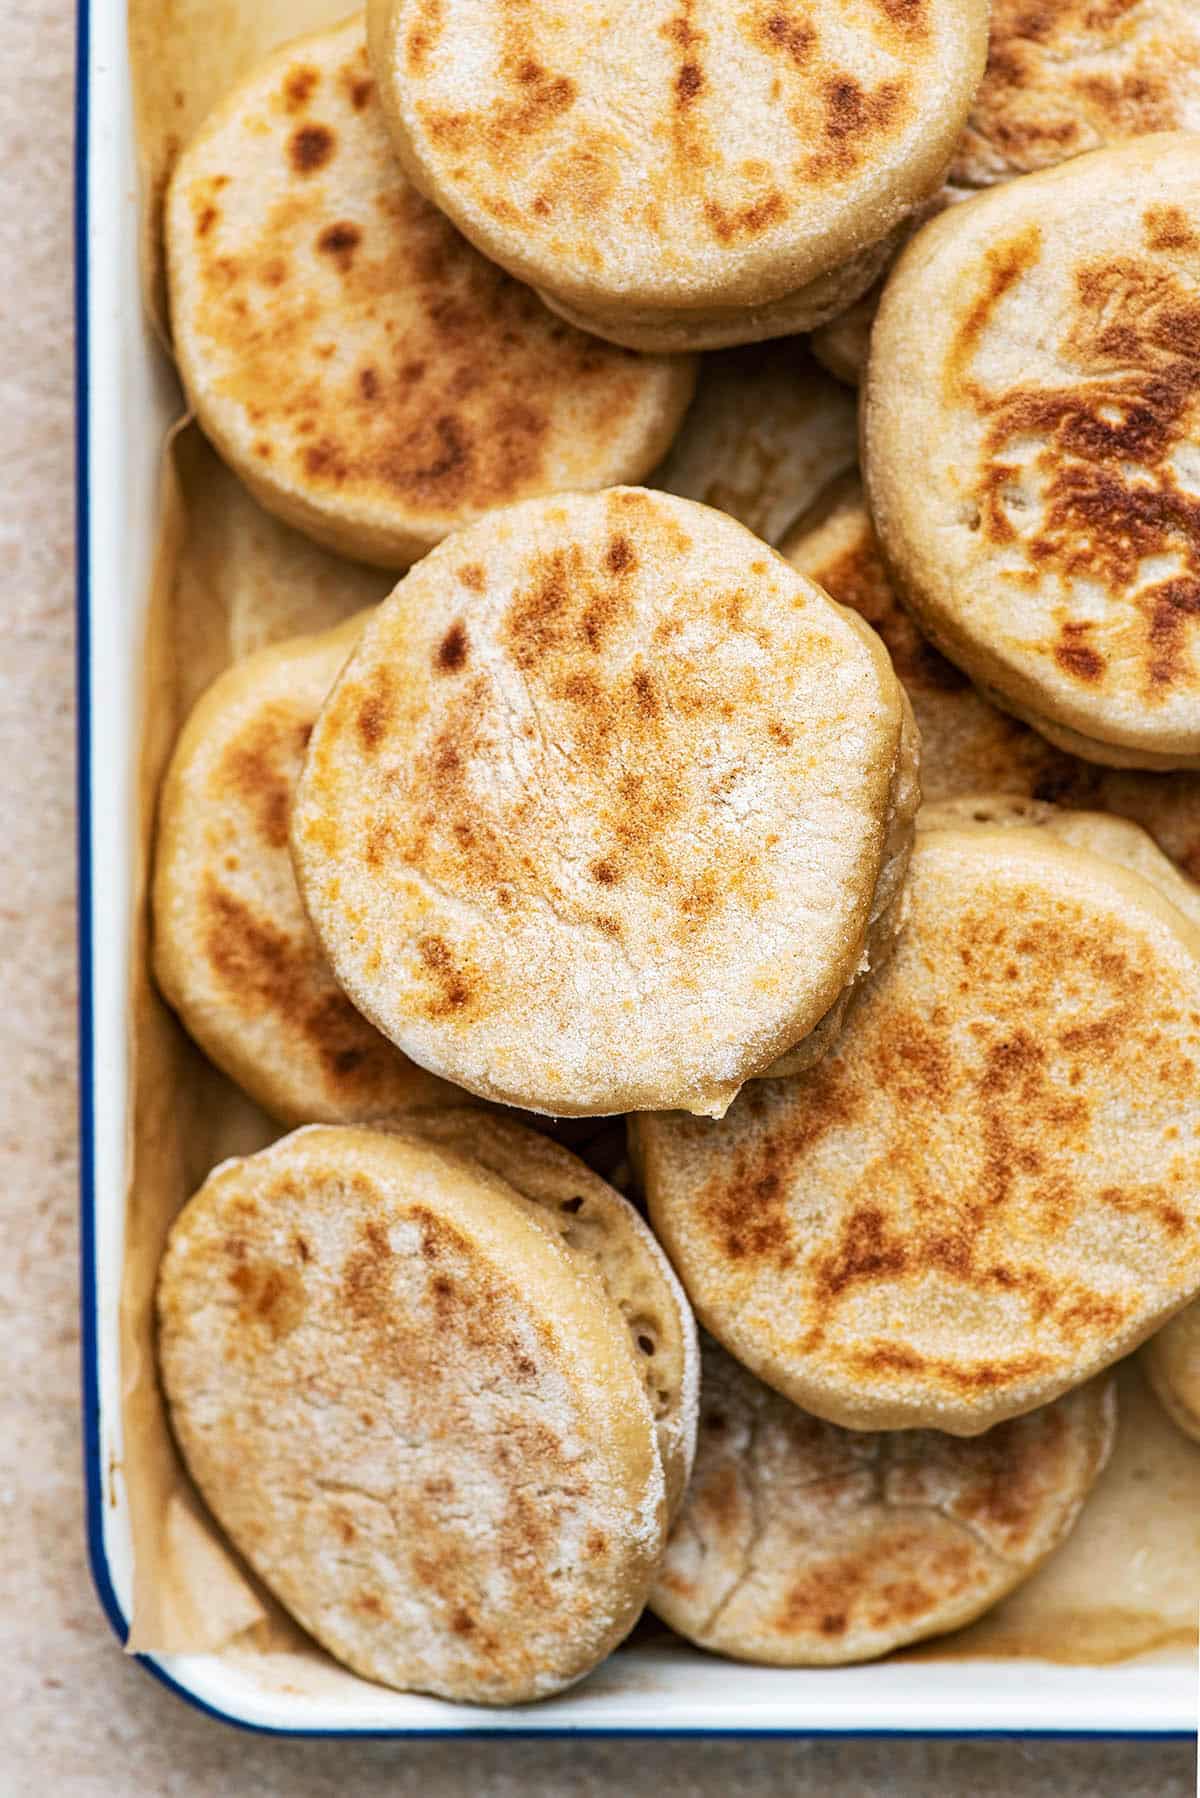 A tray full of english muffins, top down view.